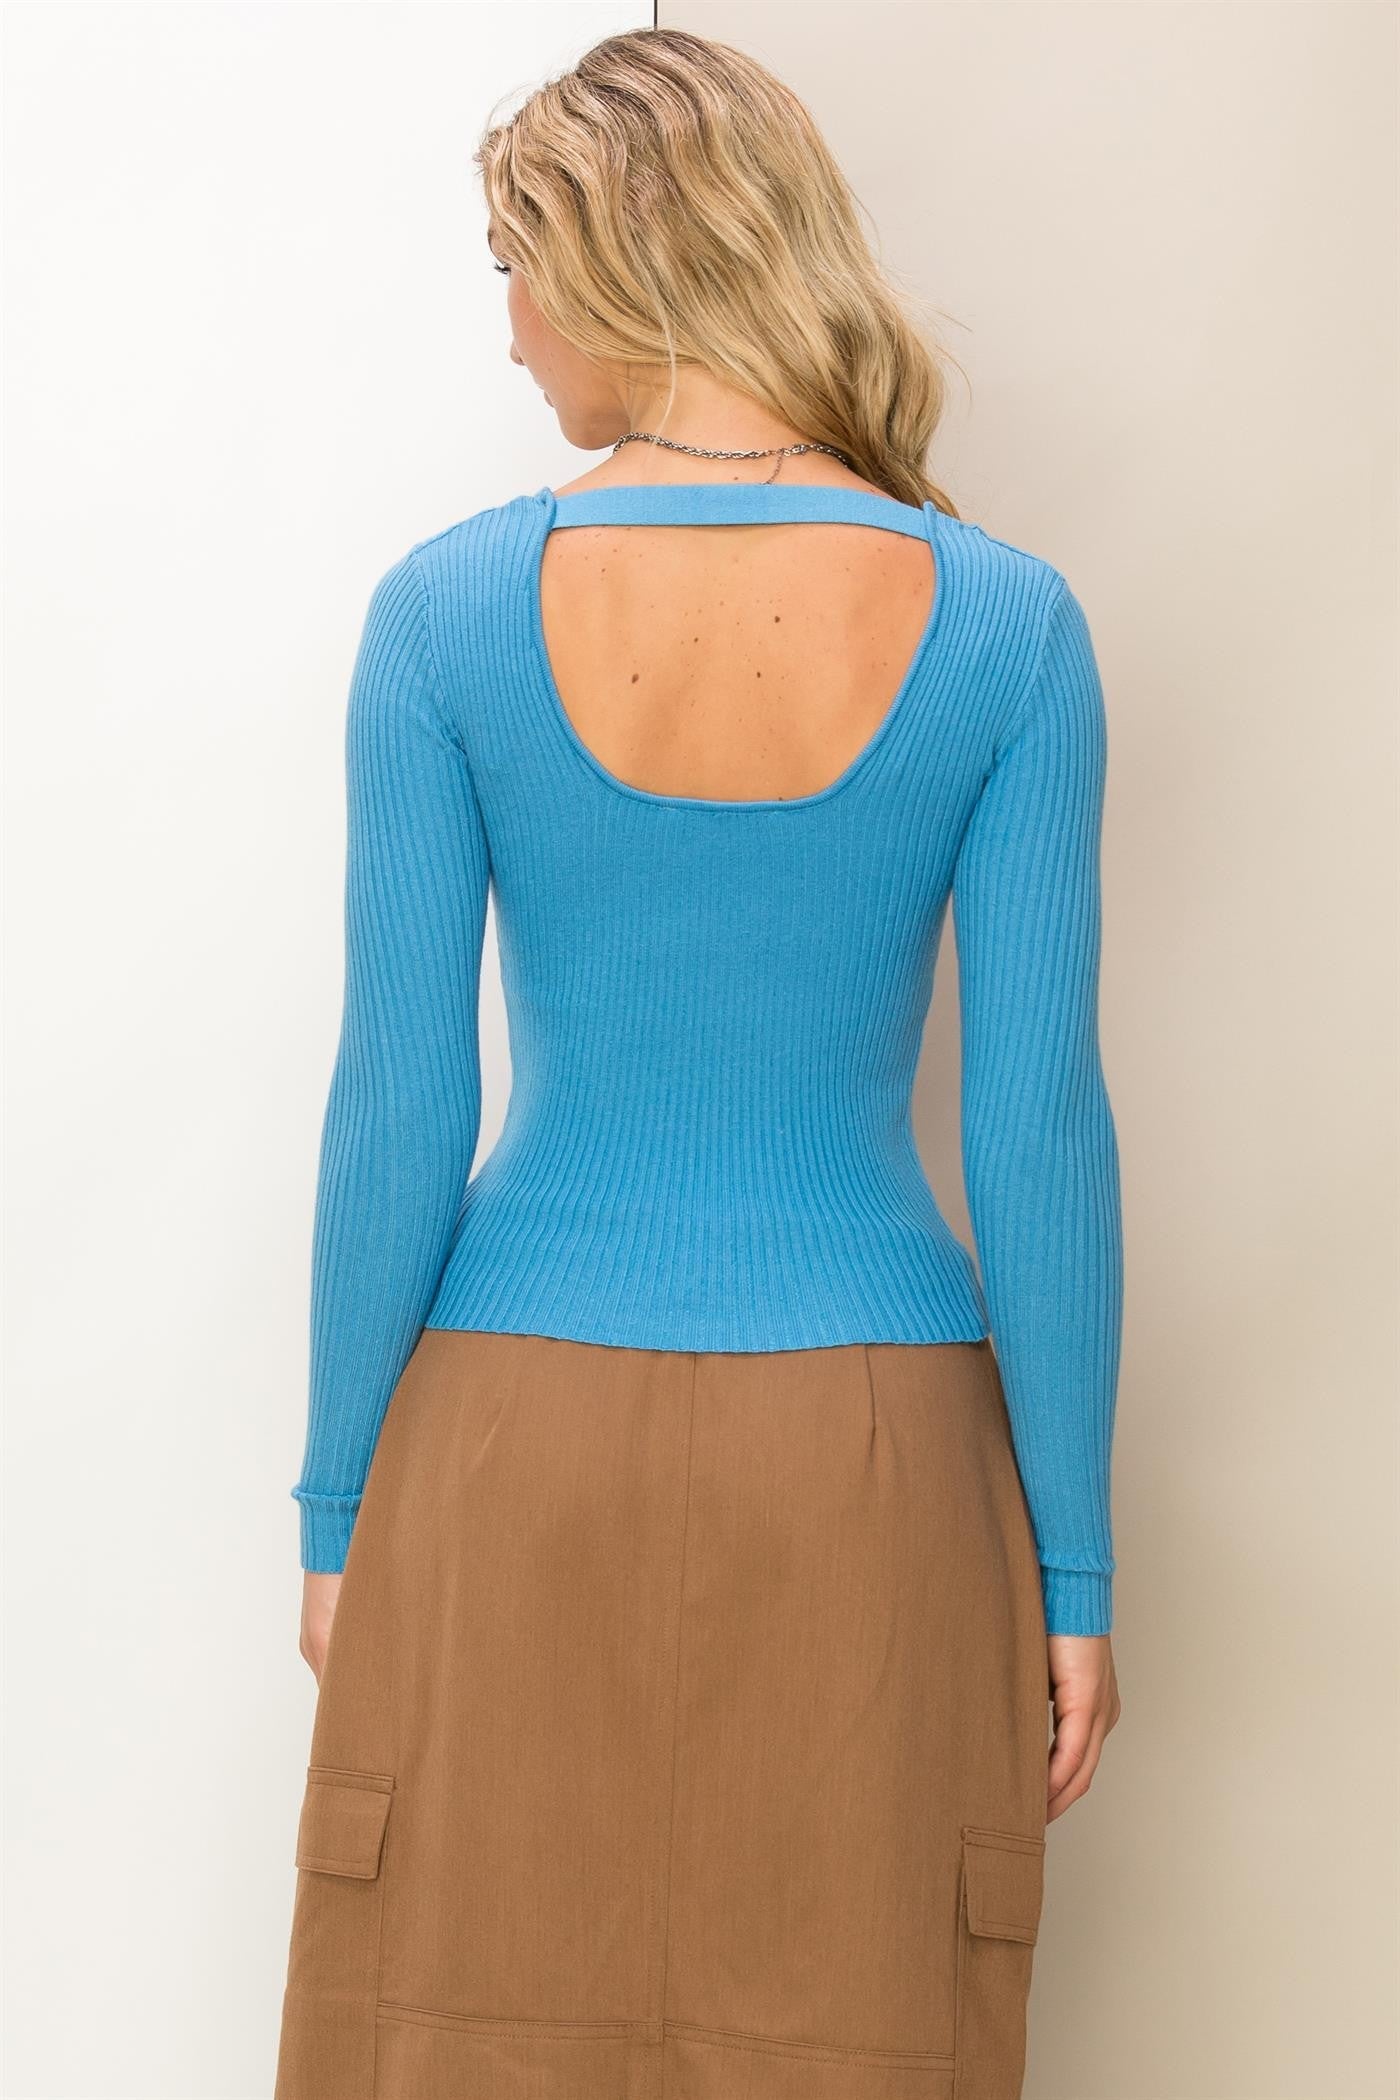 "Simple As Is" Top (Medium Blue) - Happily Ever Aften